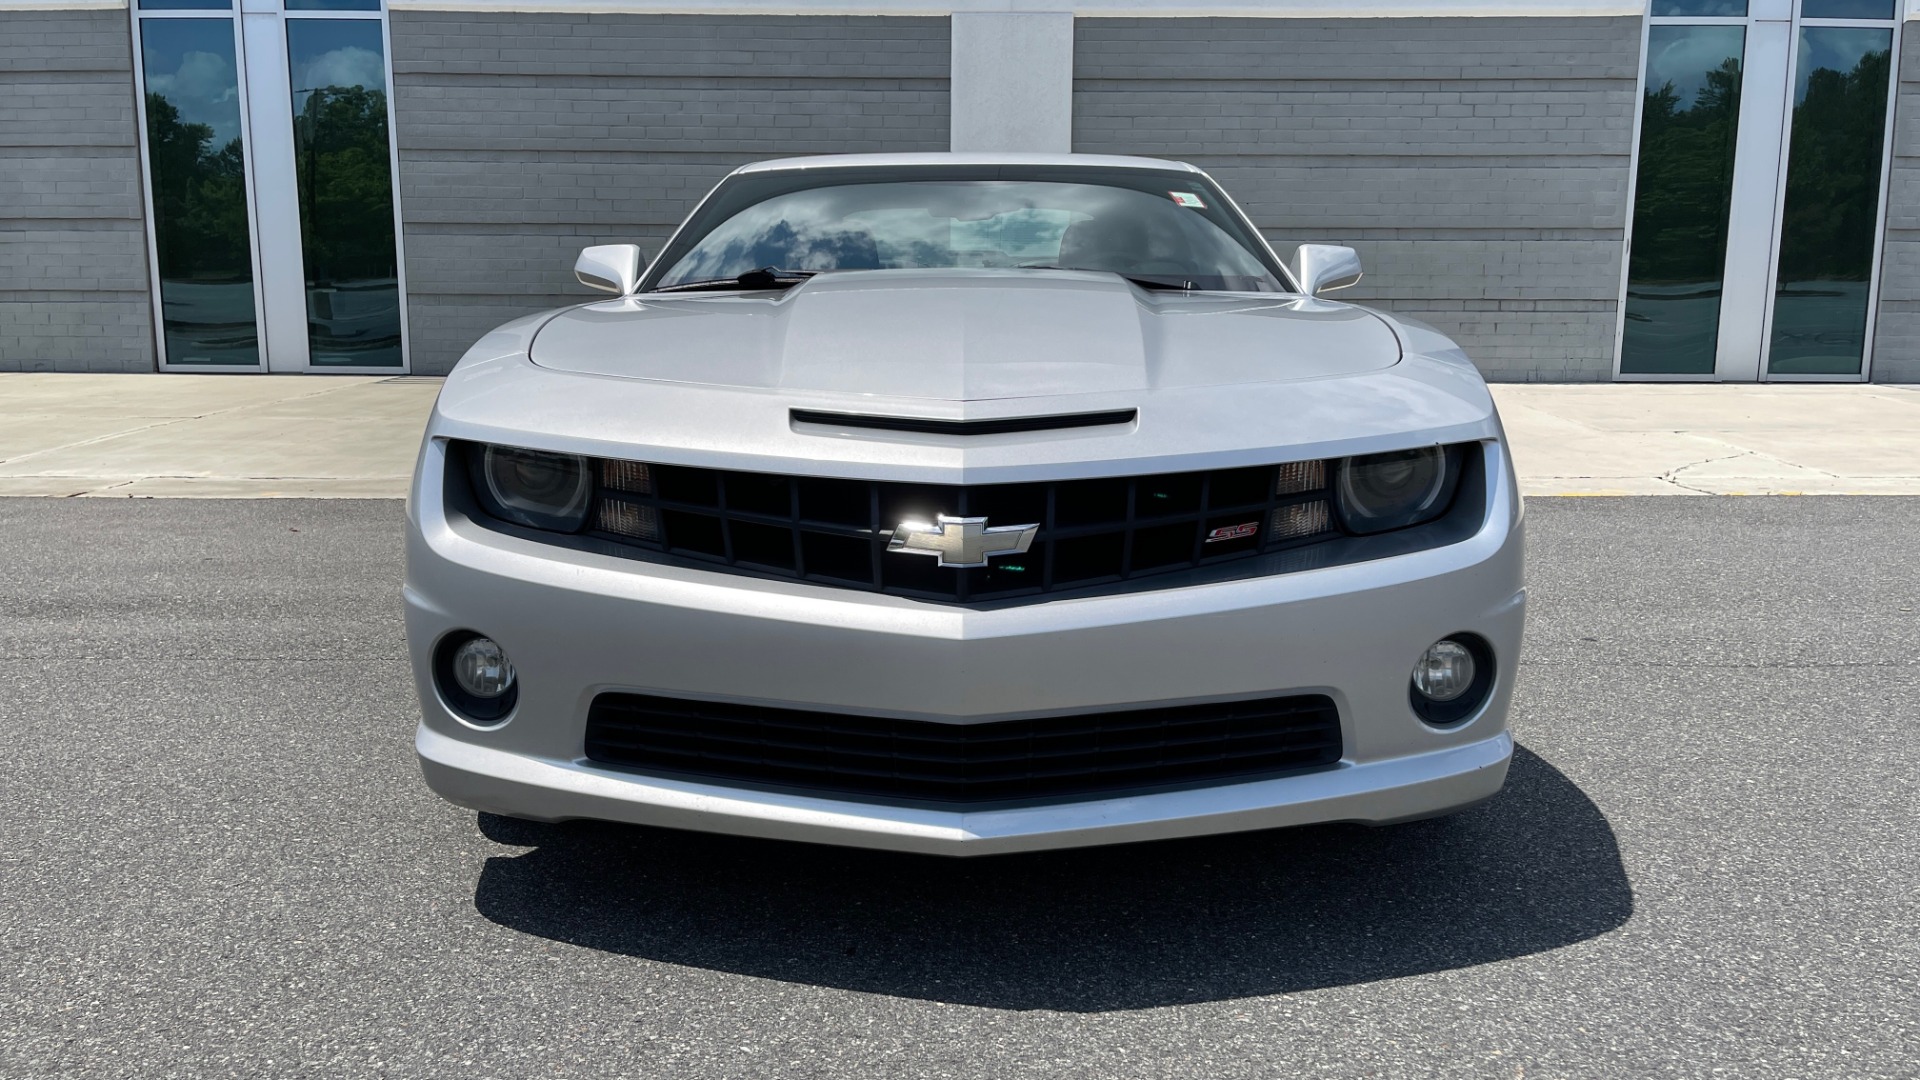 Used 2012 Chevrolet CAMARO SS COUPE / 6.2L V8 / 2SS / RS PKG / 6-SPD AUTO / SUNROOF / REMOTE START for sale Sold at Formula Imports in Charlotte NC 28227 6